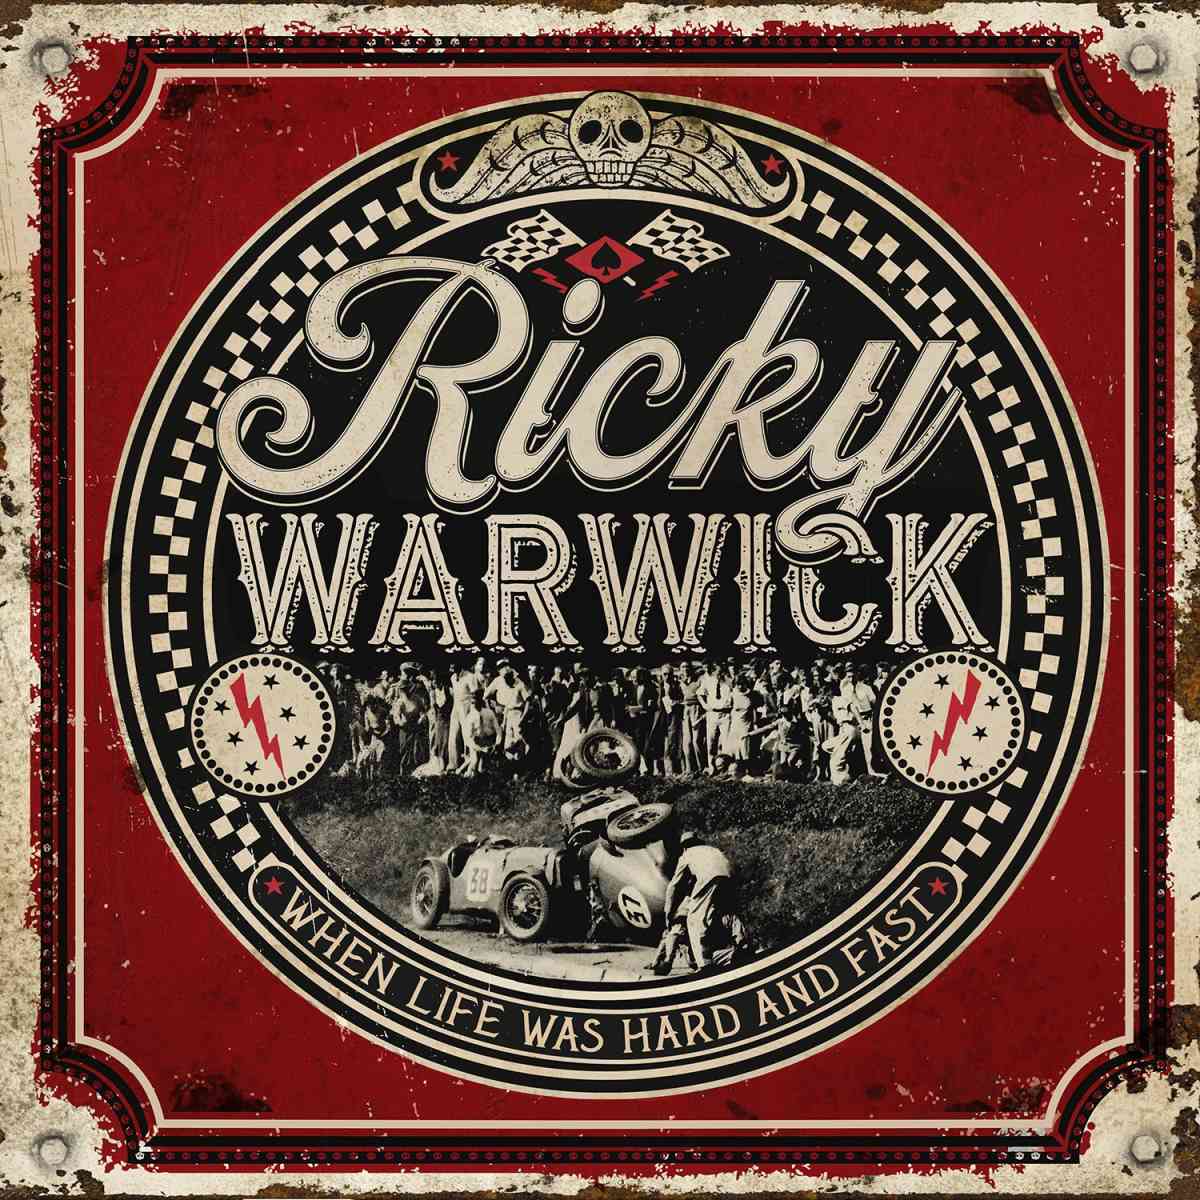 Ricky Warwick - When Life Was Hard and Fast - album cover